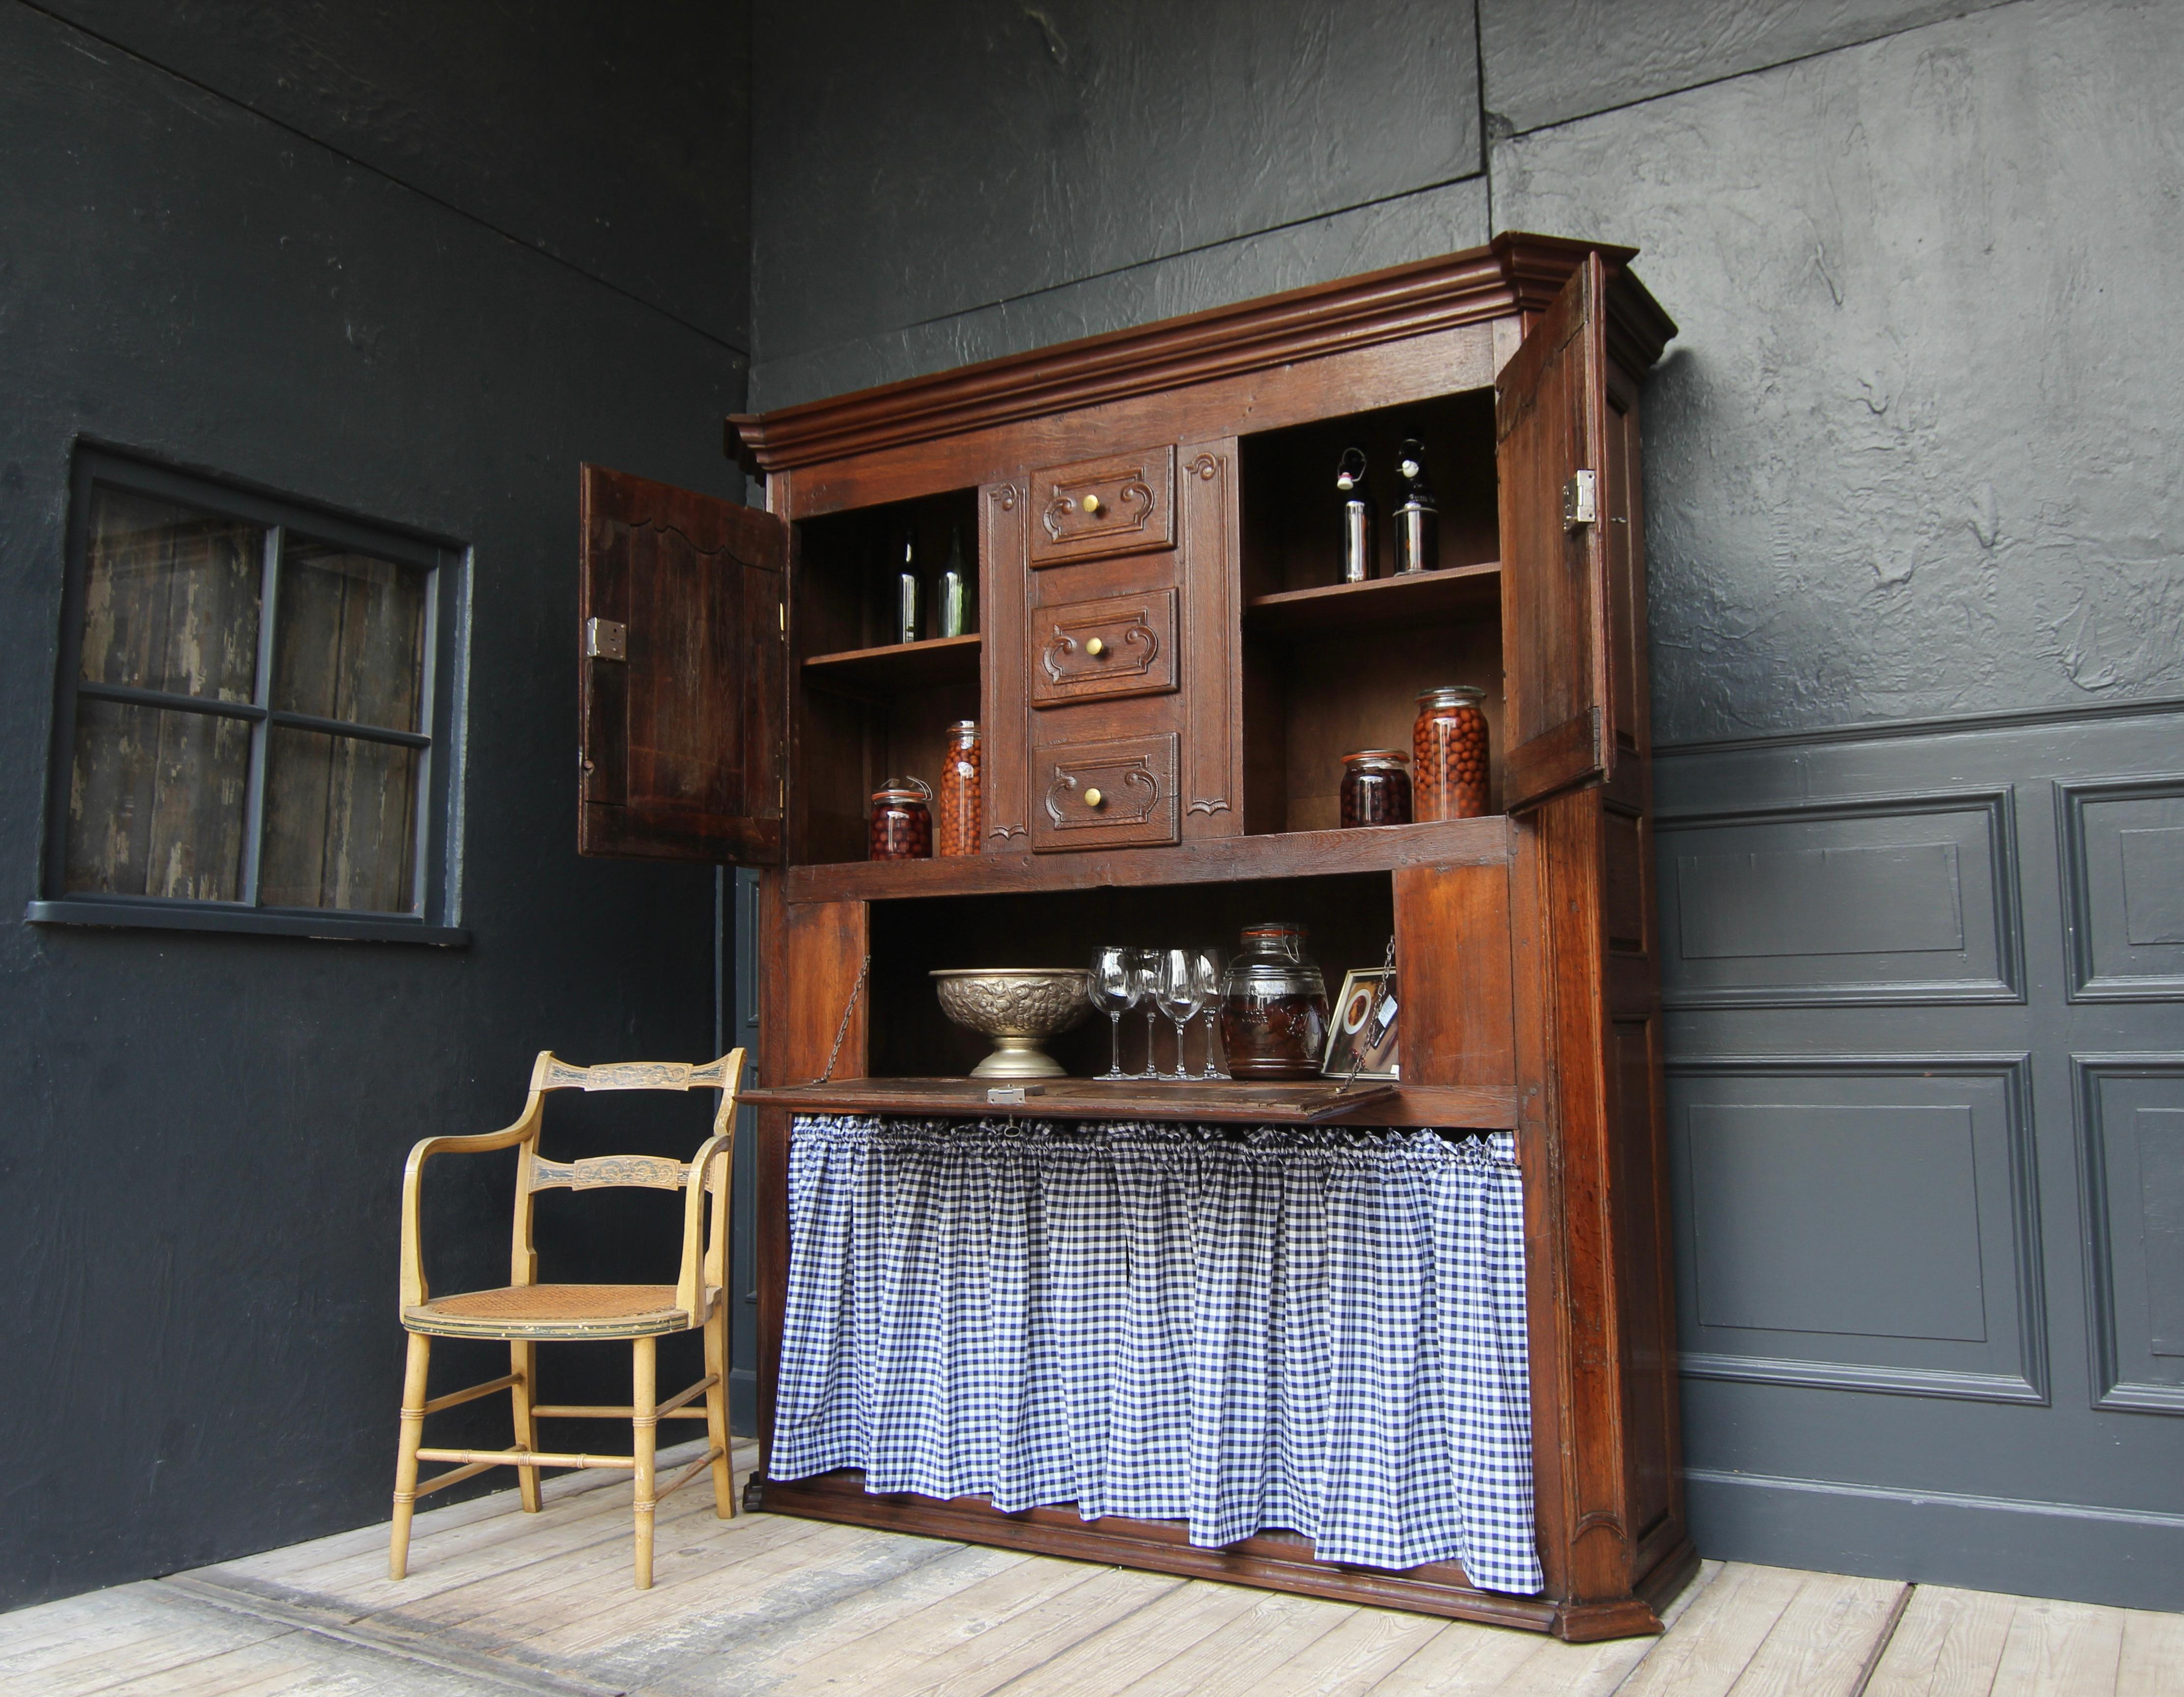 A French provincial pantry cupboard, so-called 